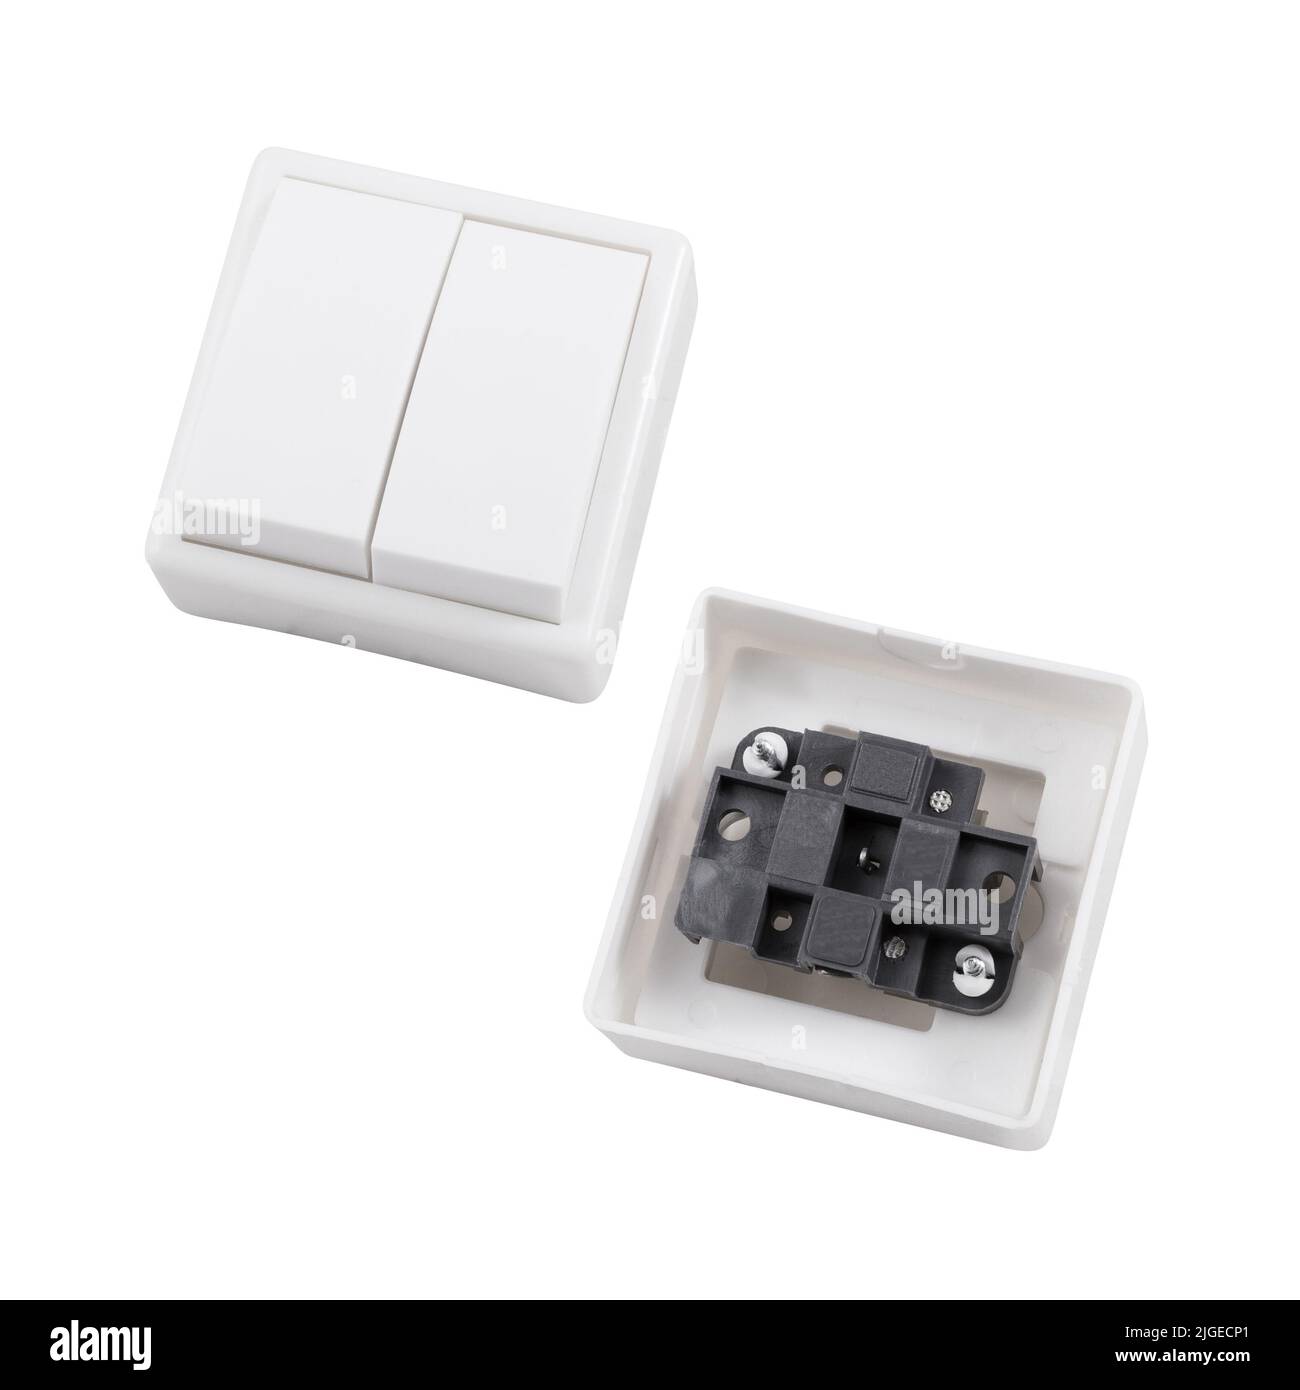 Built-in light switch with 2 keys isolated on a white background. Photograph of the switch front and back. Stock Photo